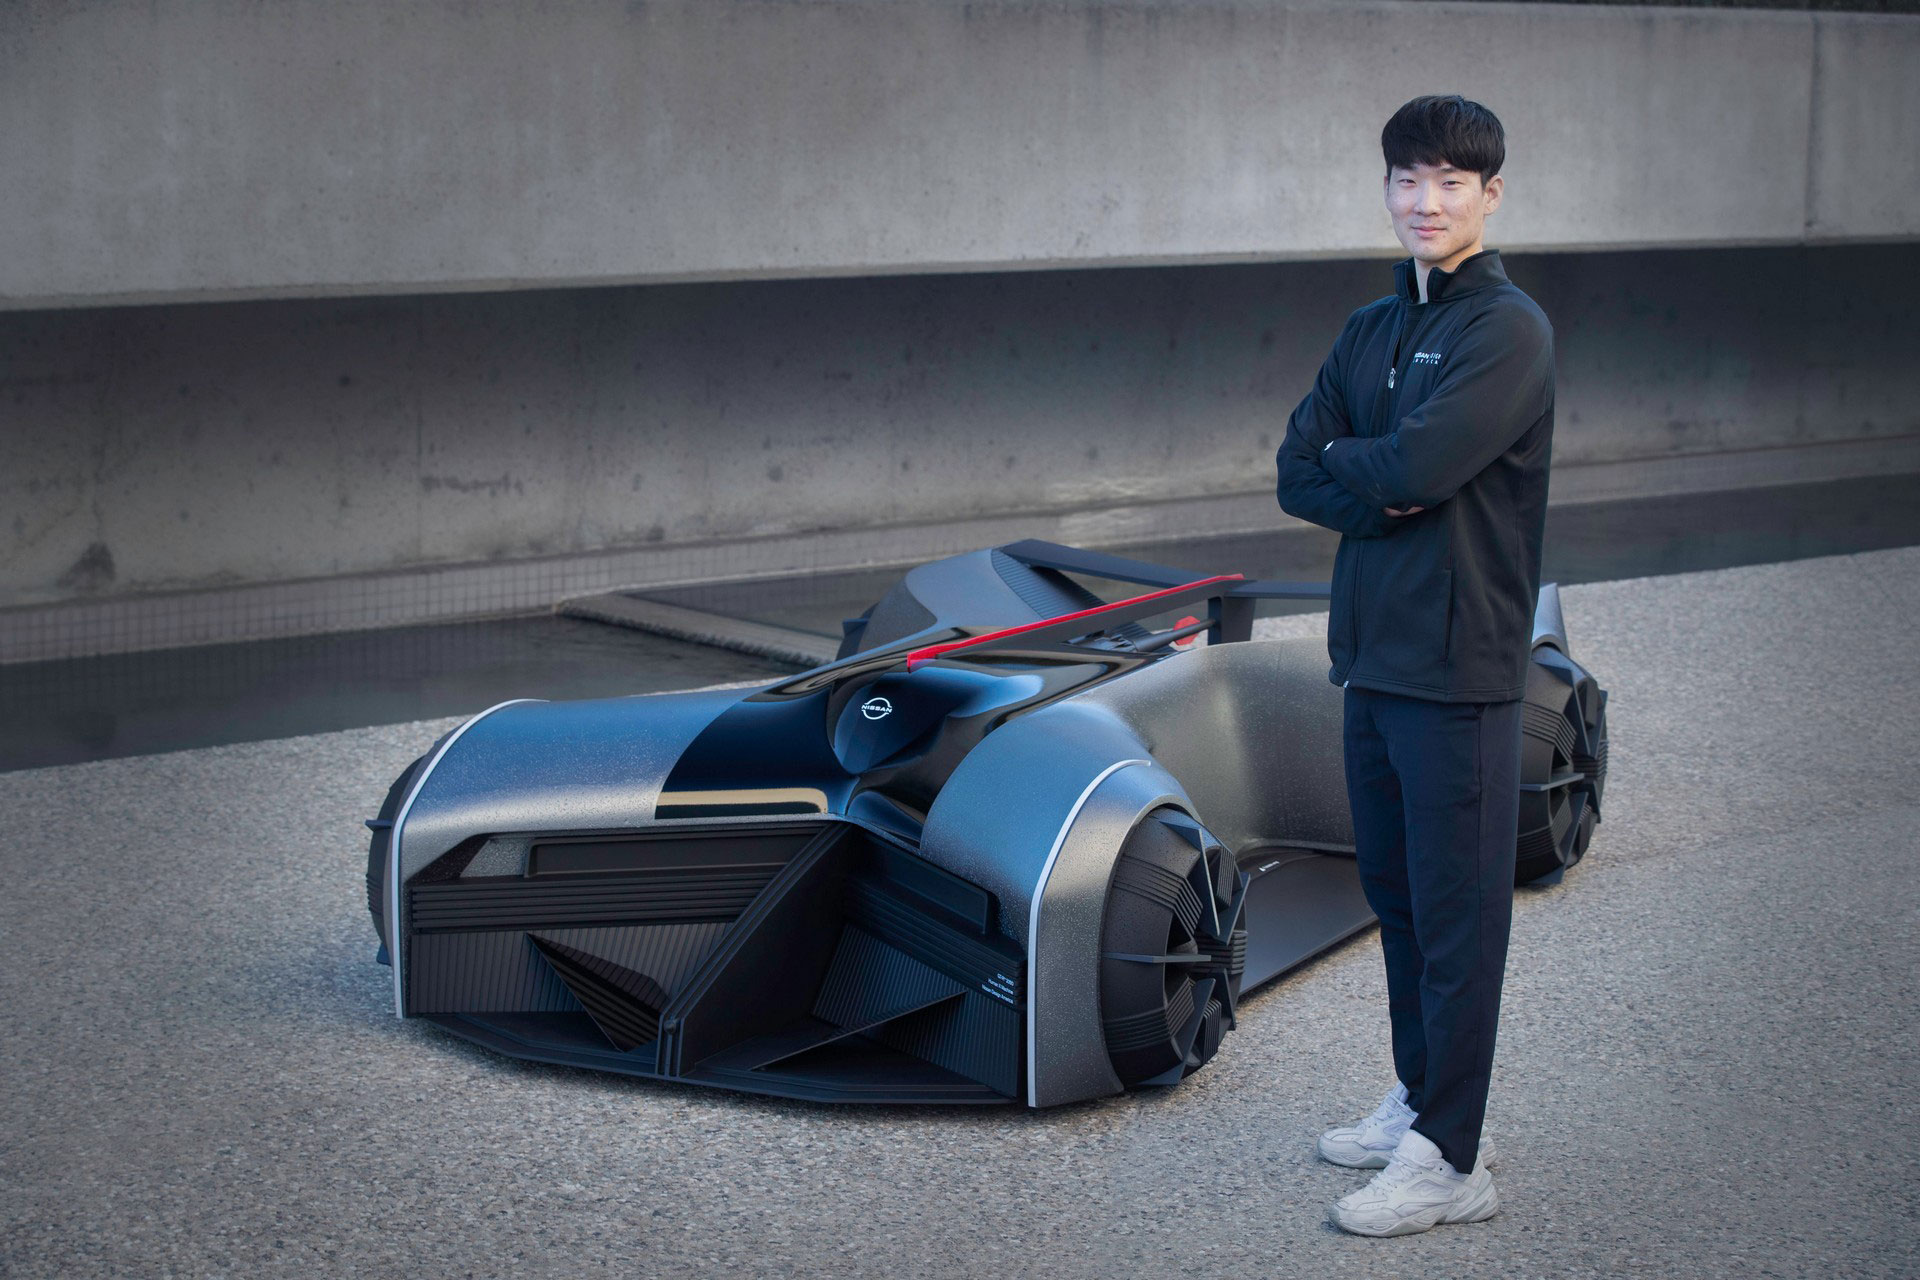 Nissan GT-R (X) 2050 concept, a mind-controlled exoskeleton on four wheels.